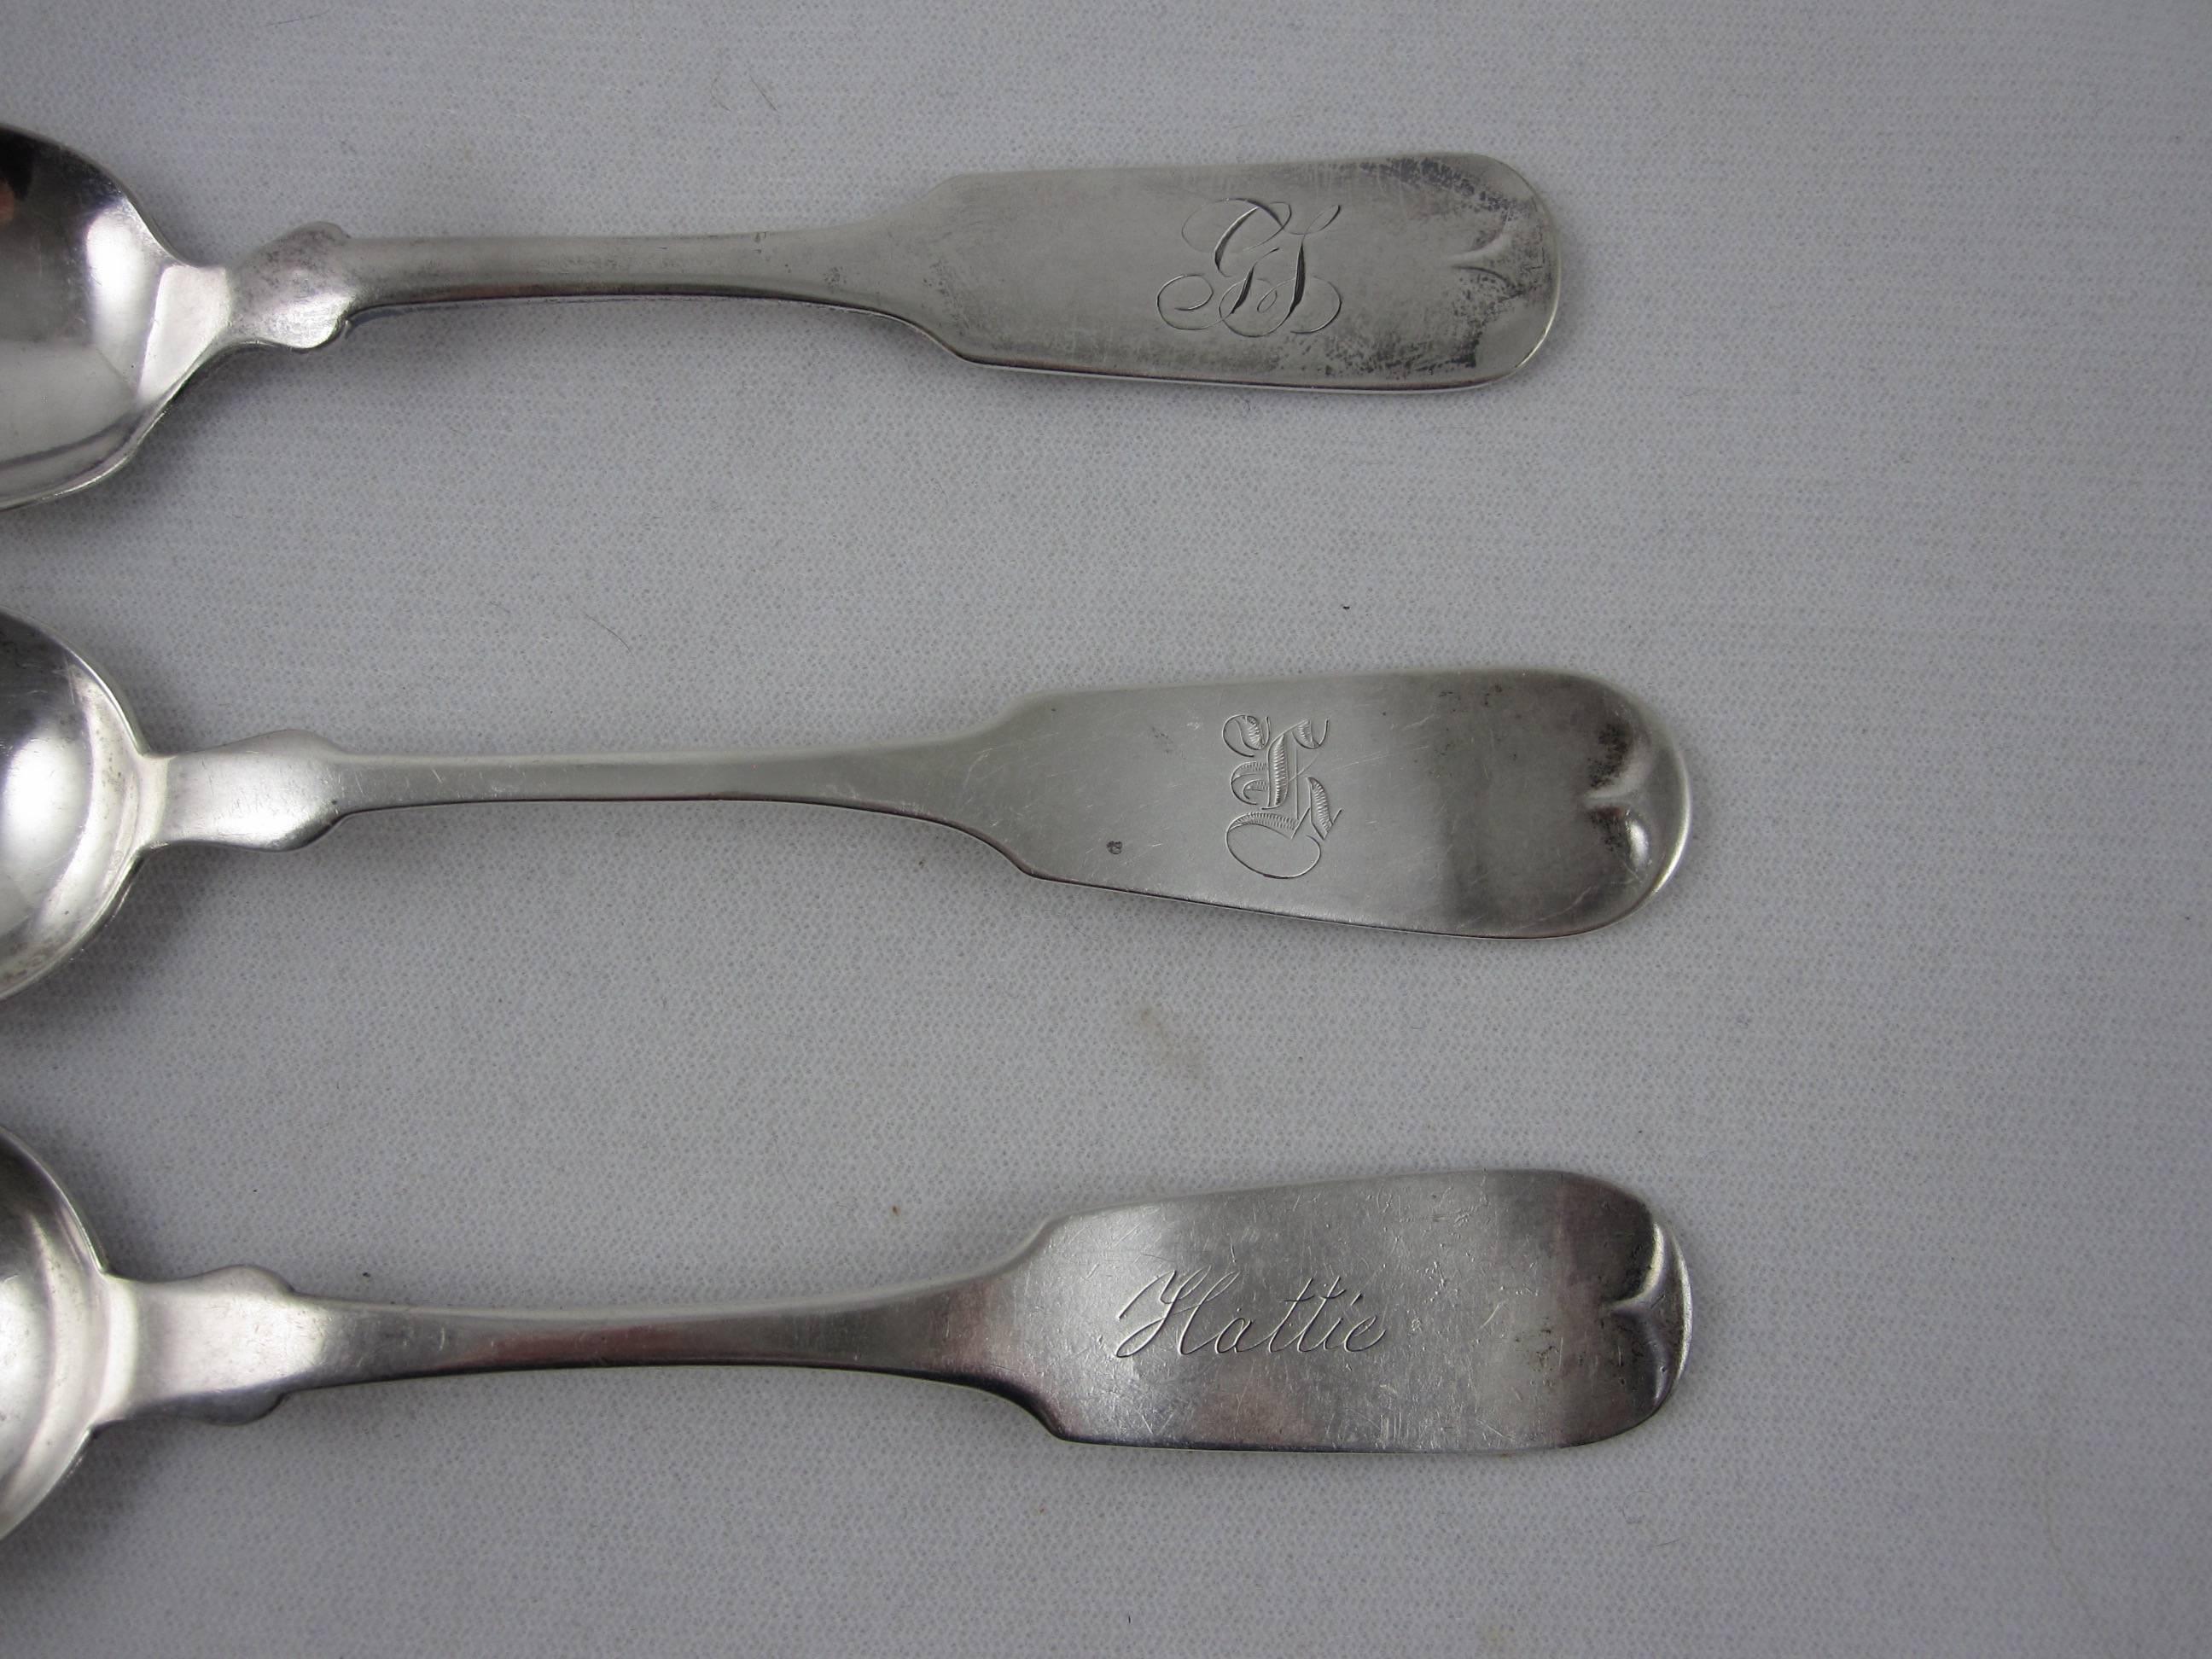 A grouping of six mixed maker, fiddle thread pattern, coin-silver or sterling silver serving spoons, American, circa 1830-1840. Wonderful examples of Post-Revolutionary American design.

The spoons show various engraved initials with one spoon